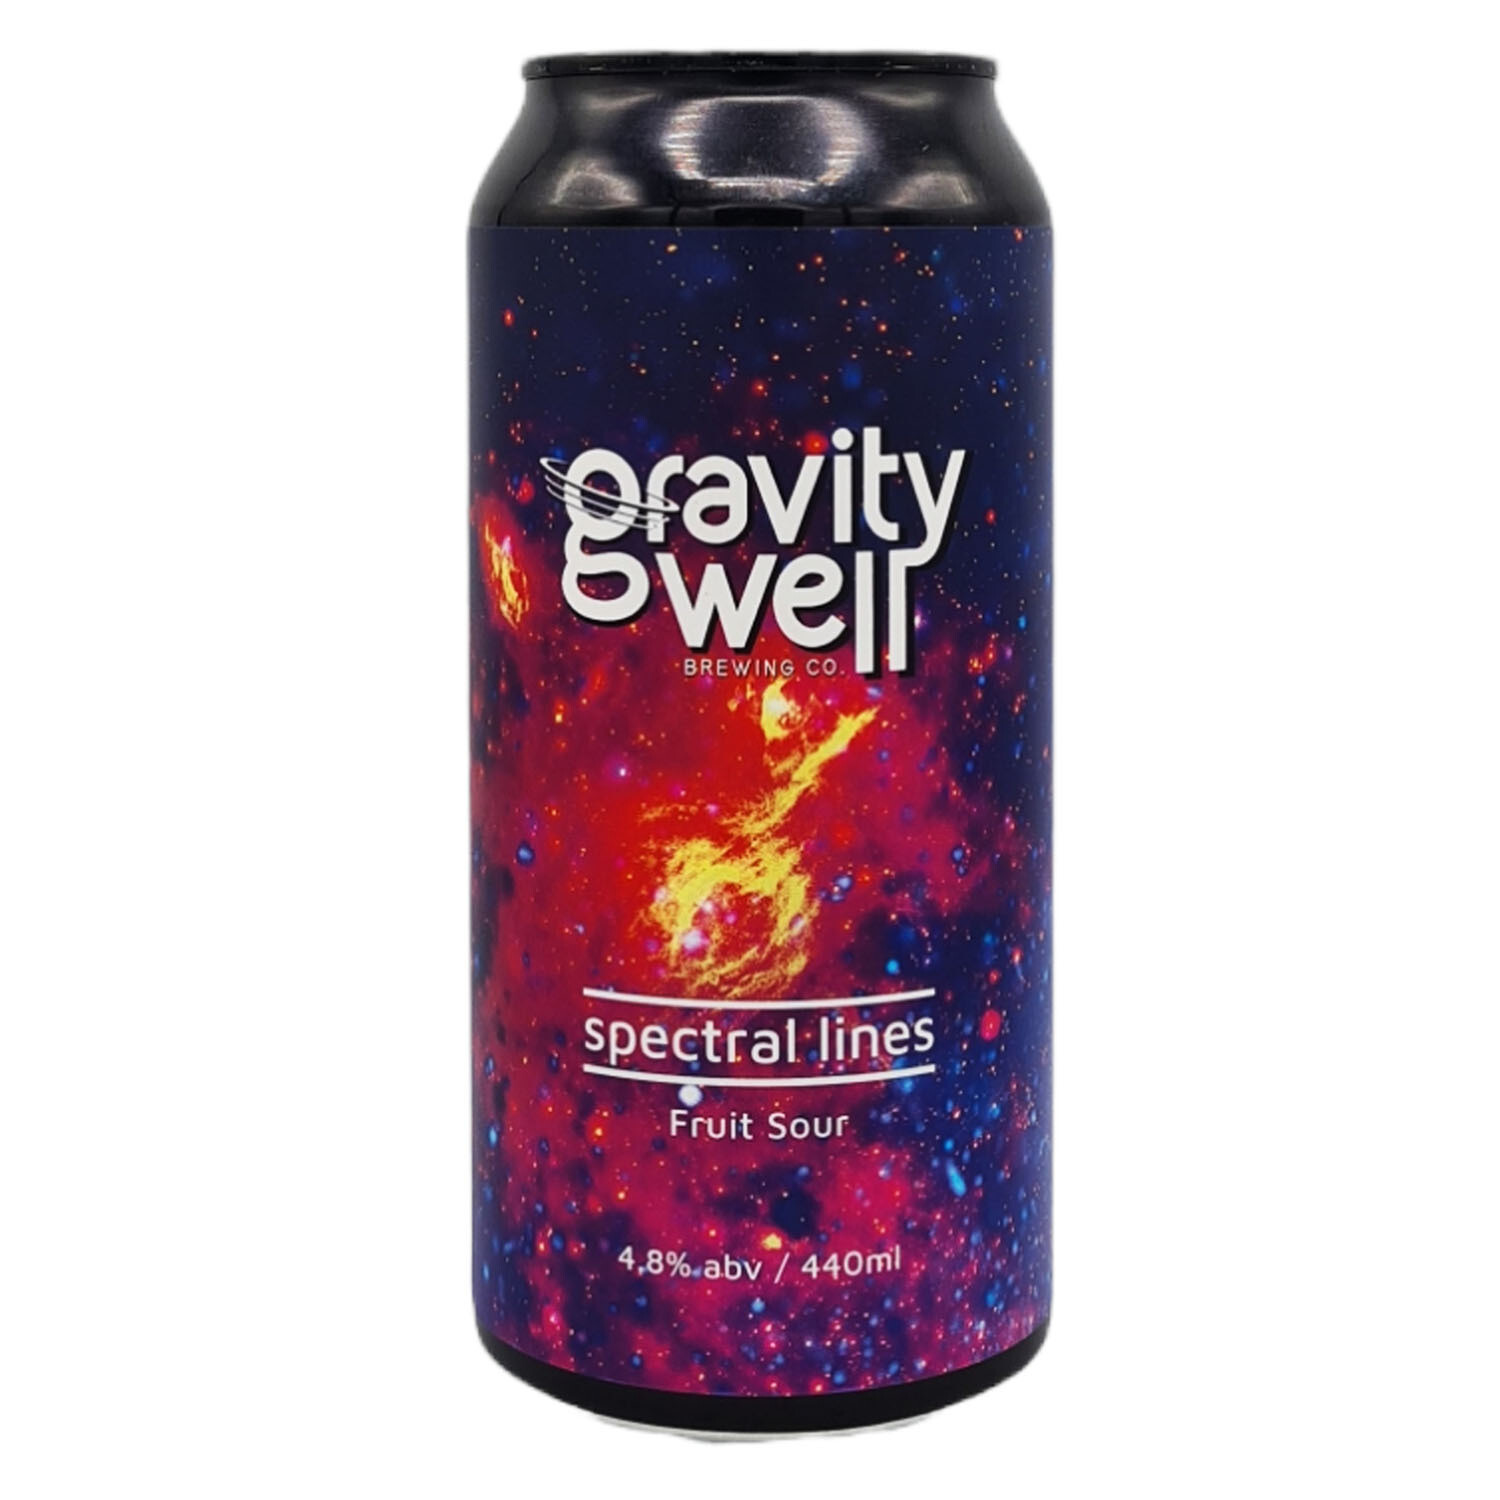 Gravity Well Spectral Lines Pineapple and Lychee kettle Sour